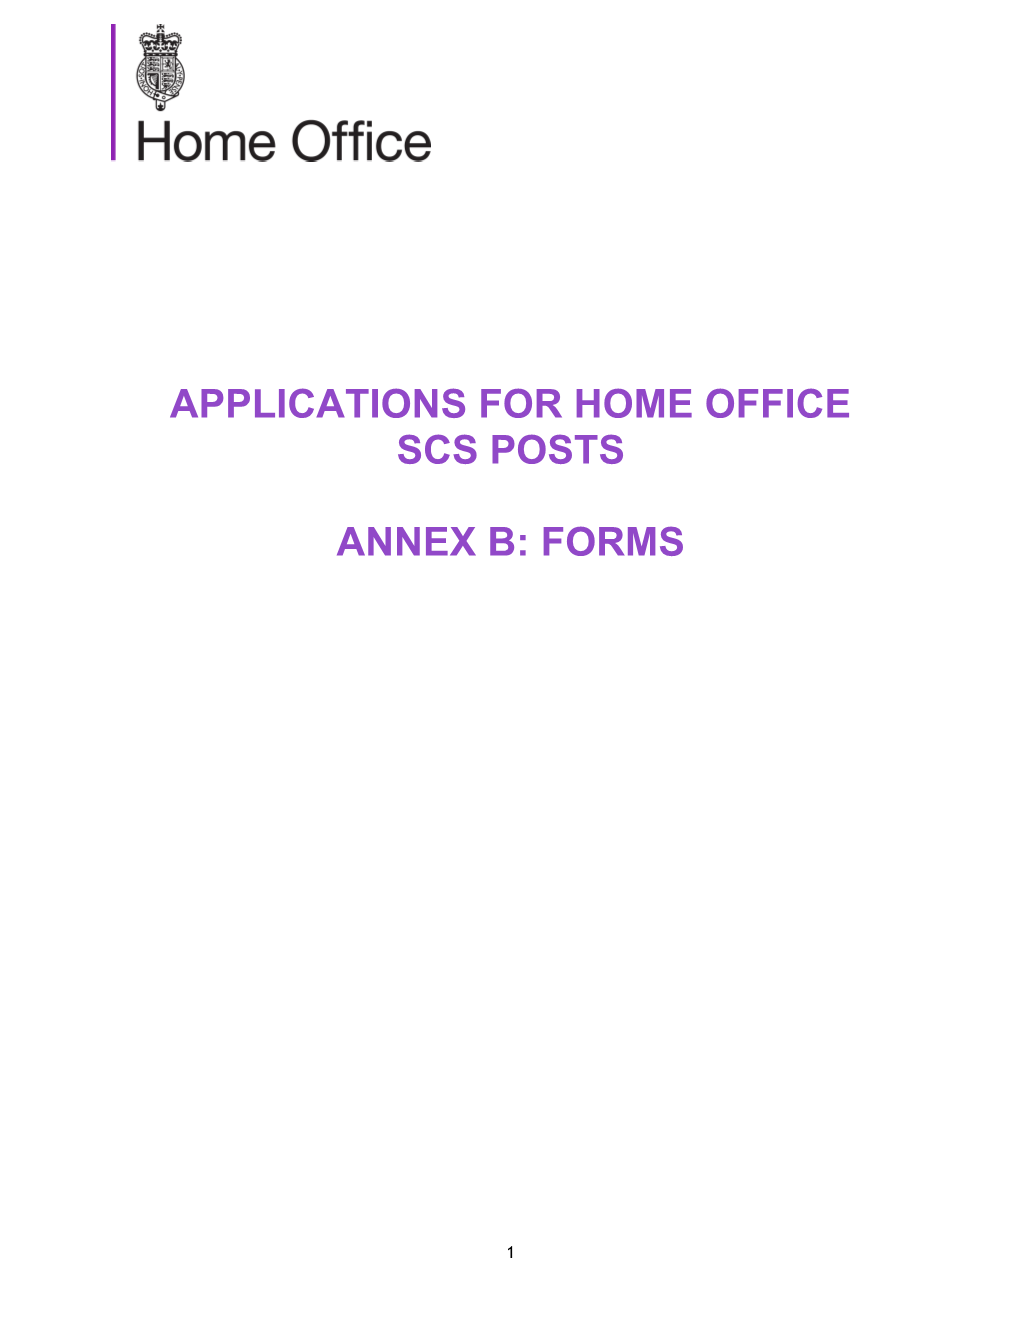 Applications for Home Office Scs Posts